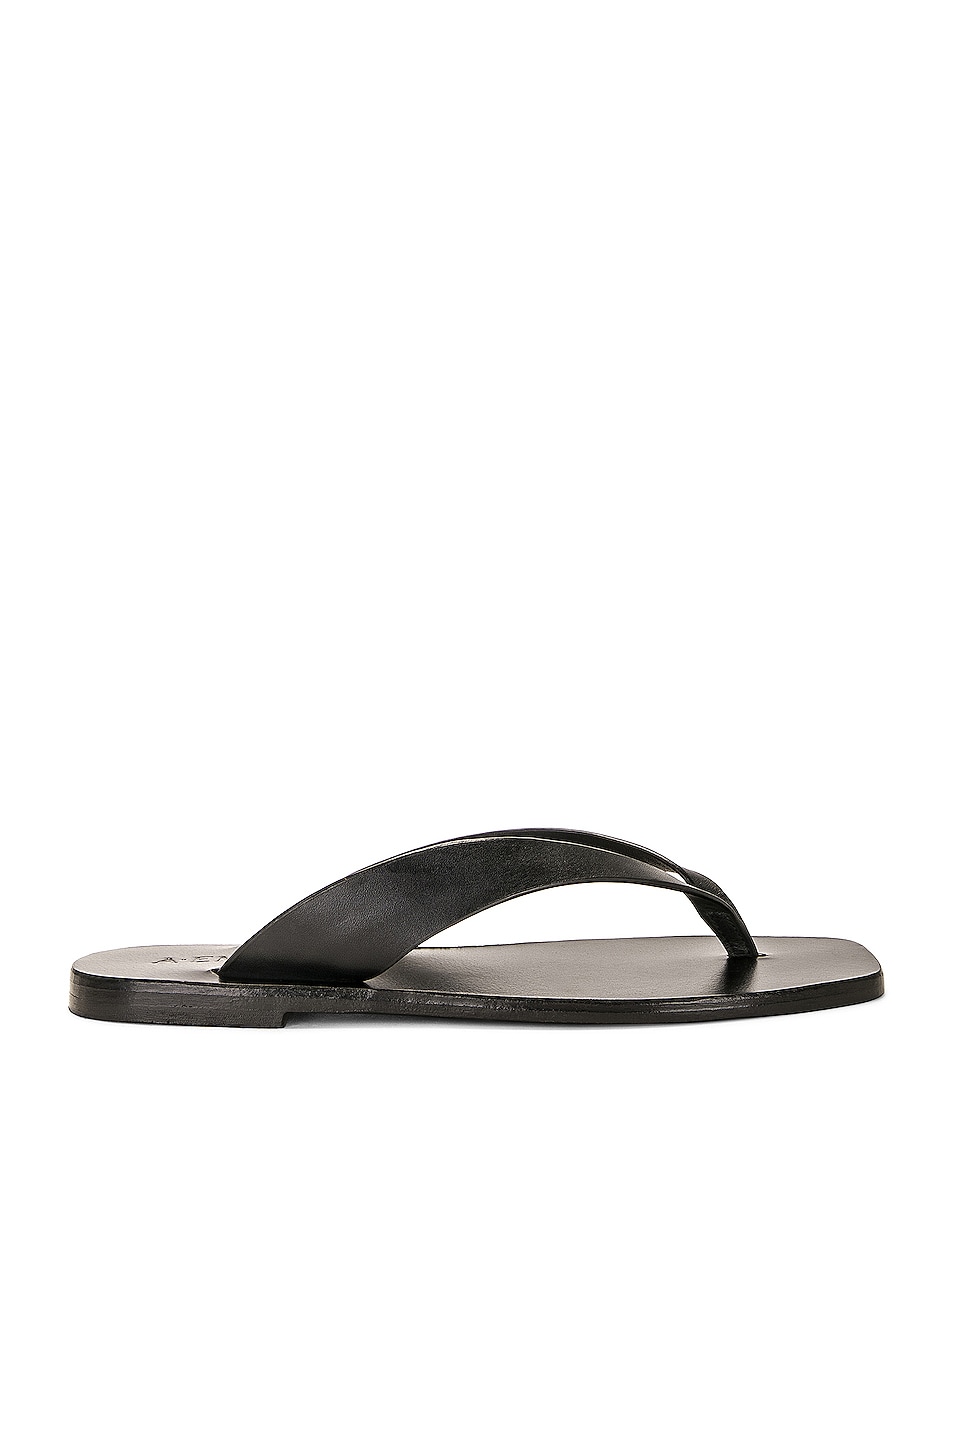 Image 1 of A.EMERY Kinto Sandal in Black